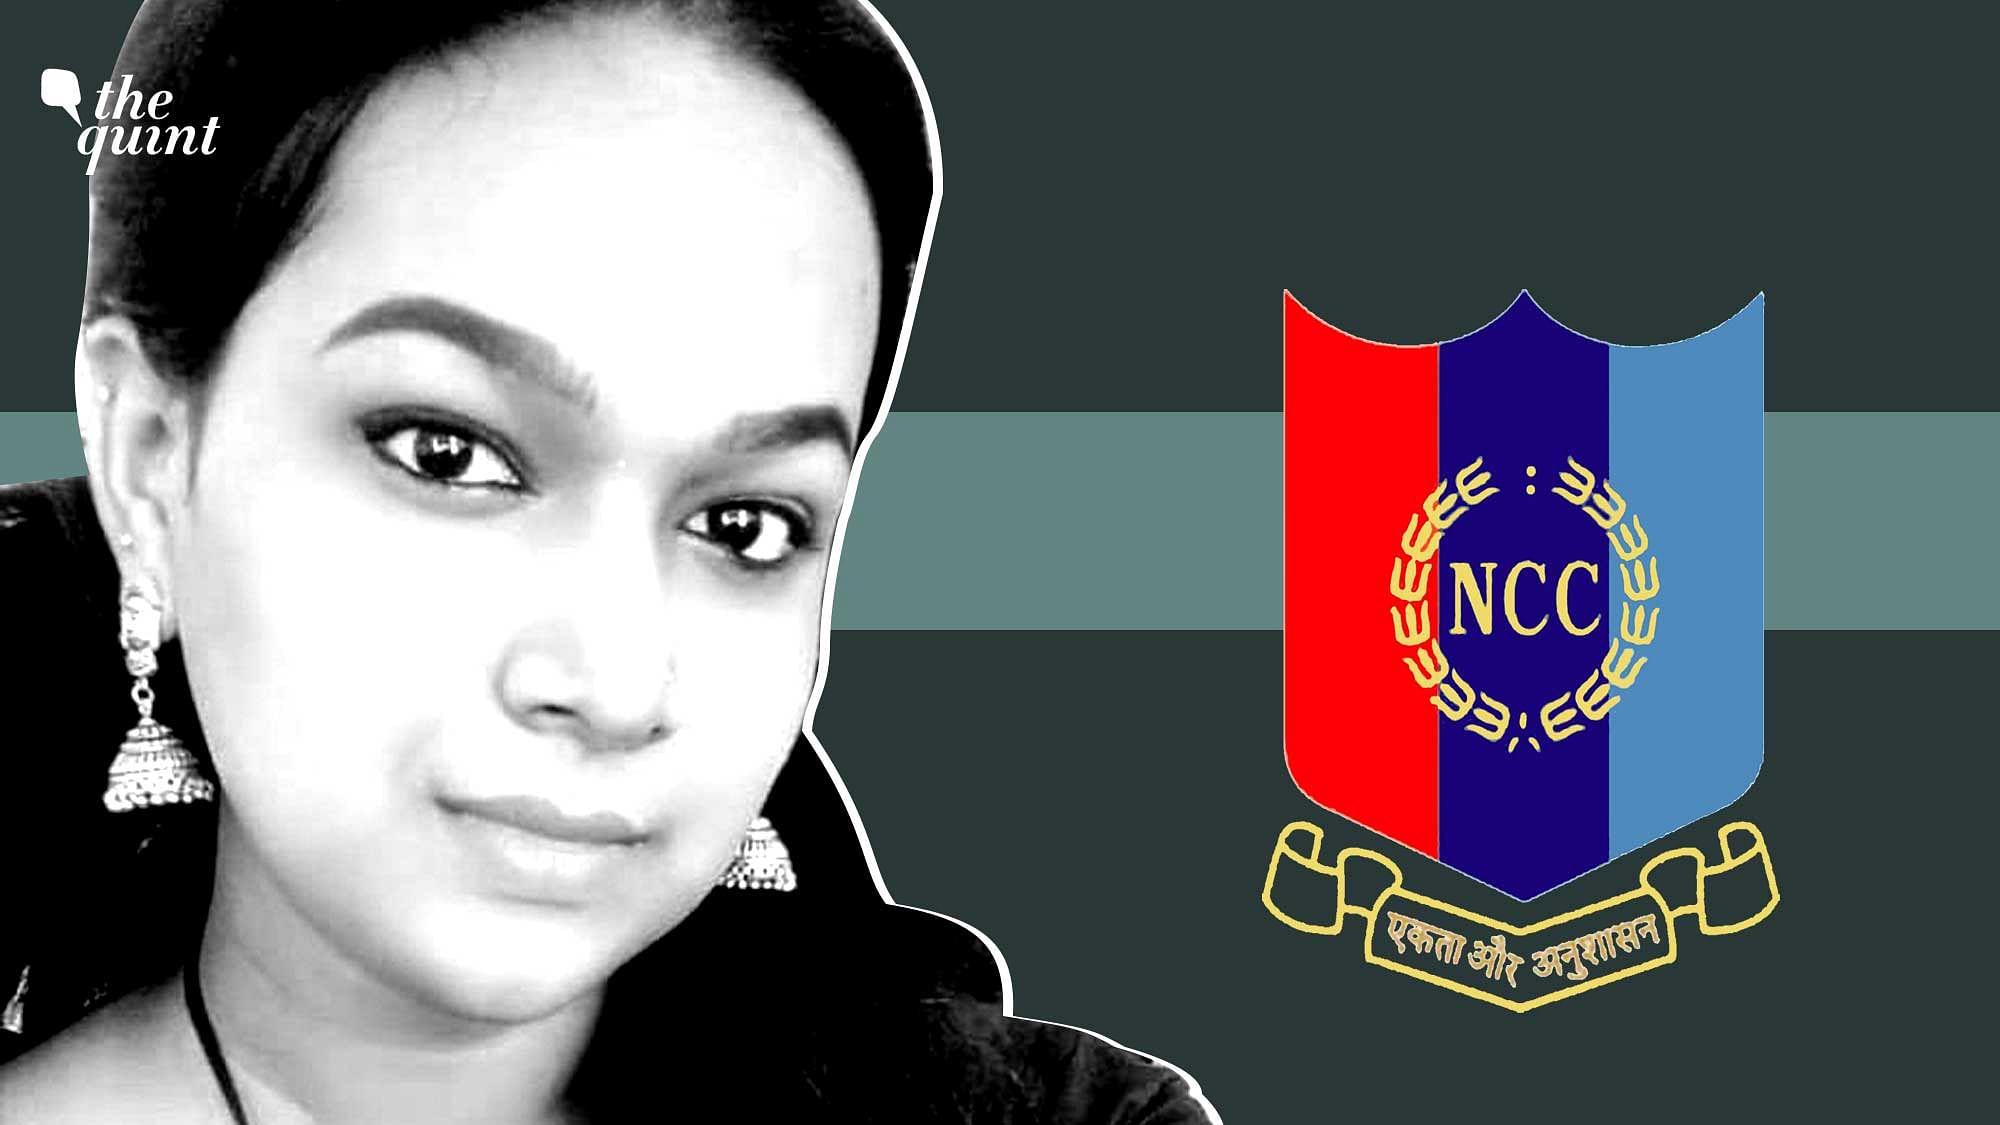 Hina Haneefa, who identifies as a woman, can now be inducted into the female wing of the NCC.